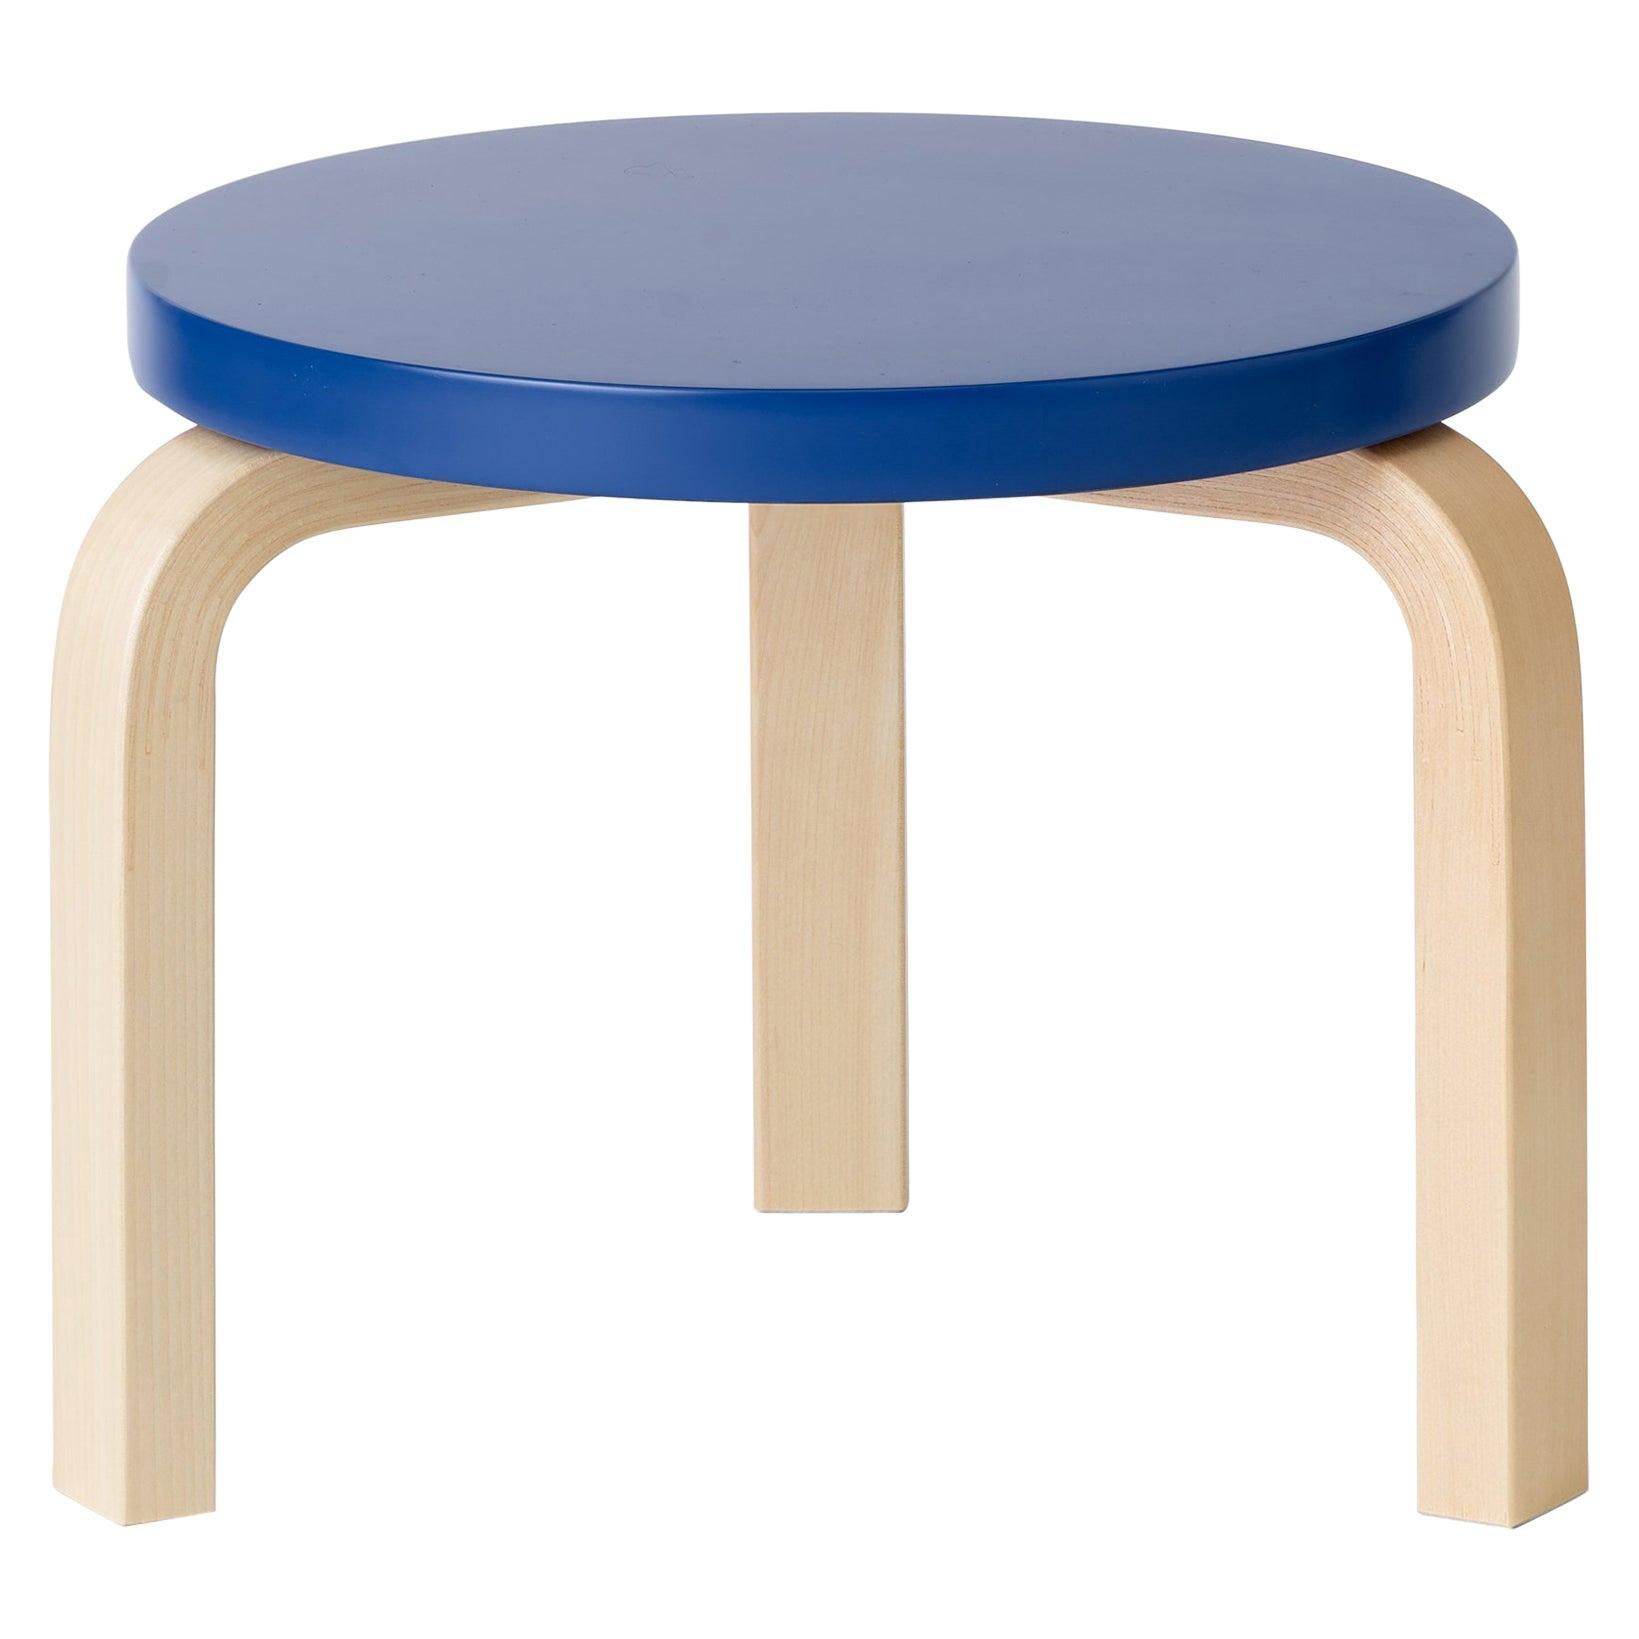 Limited Edition Low Stool 60 in Moonstone by Artek and Heath